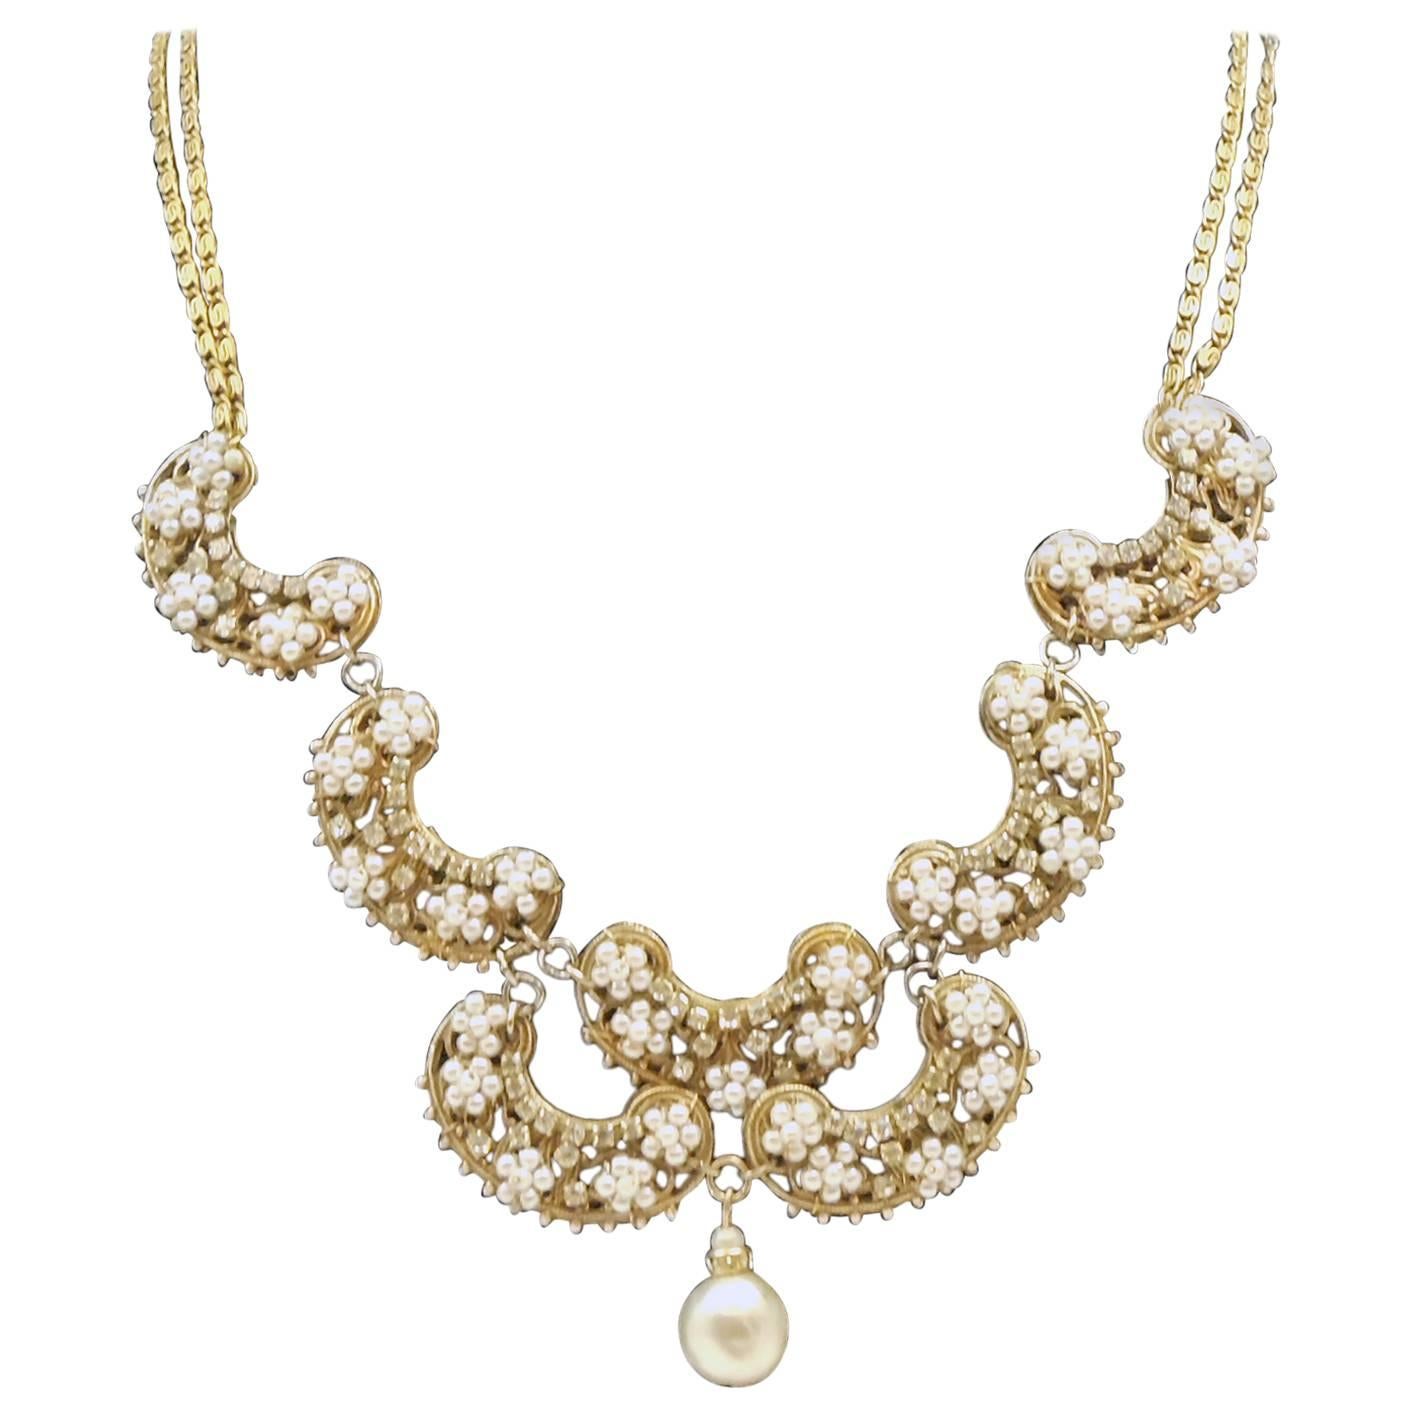 Early 1930s Miriam Haskell Faux Pearl Scallop Necklace